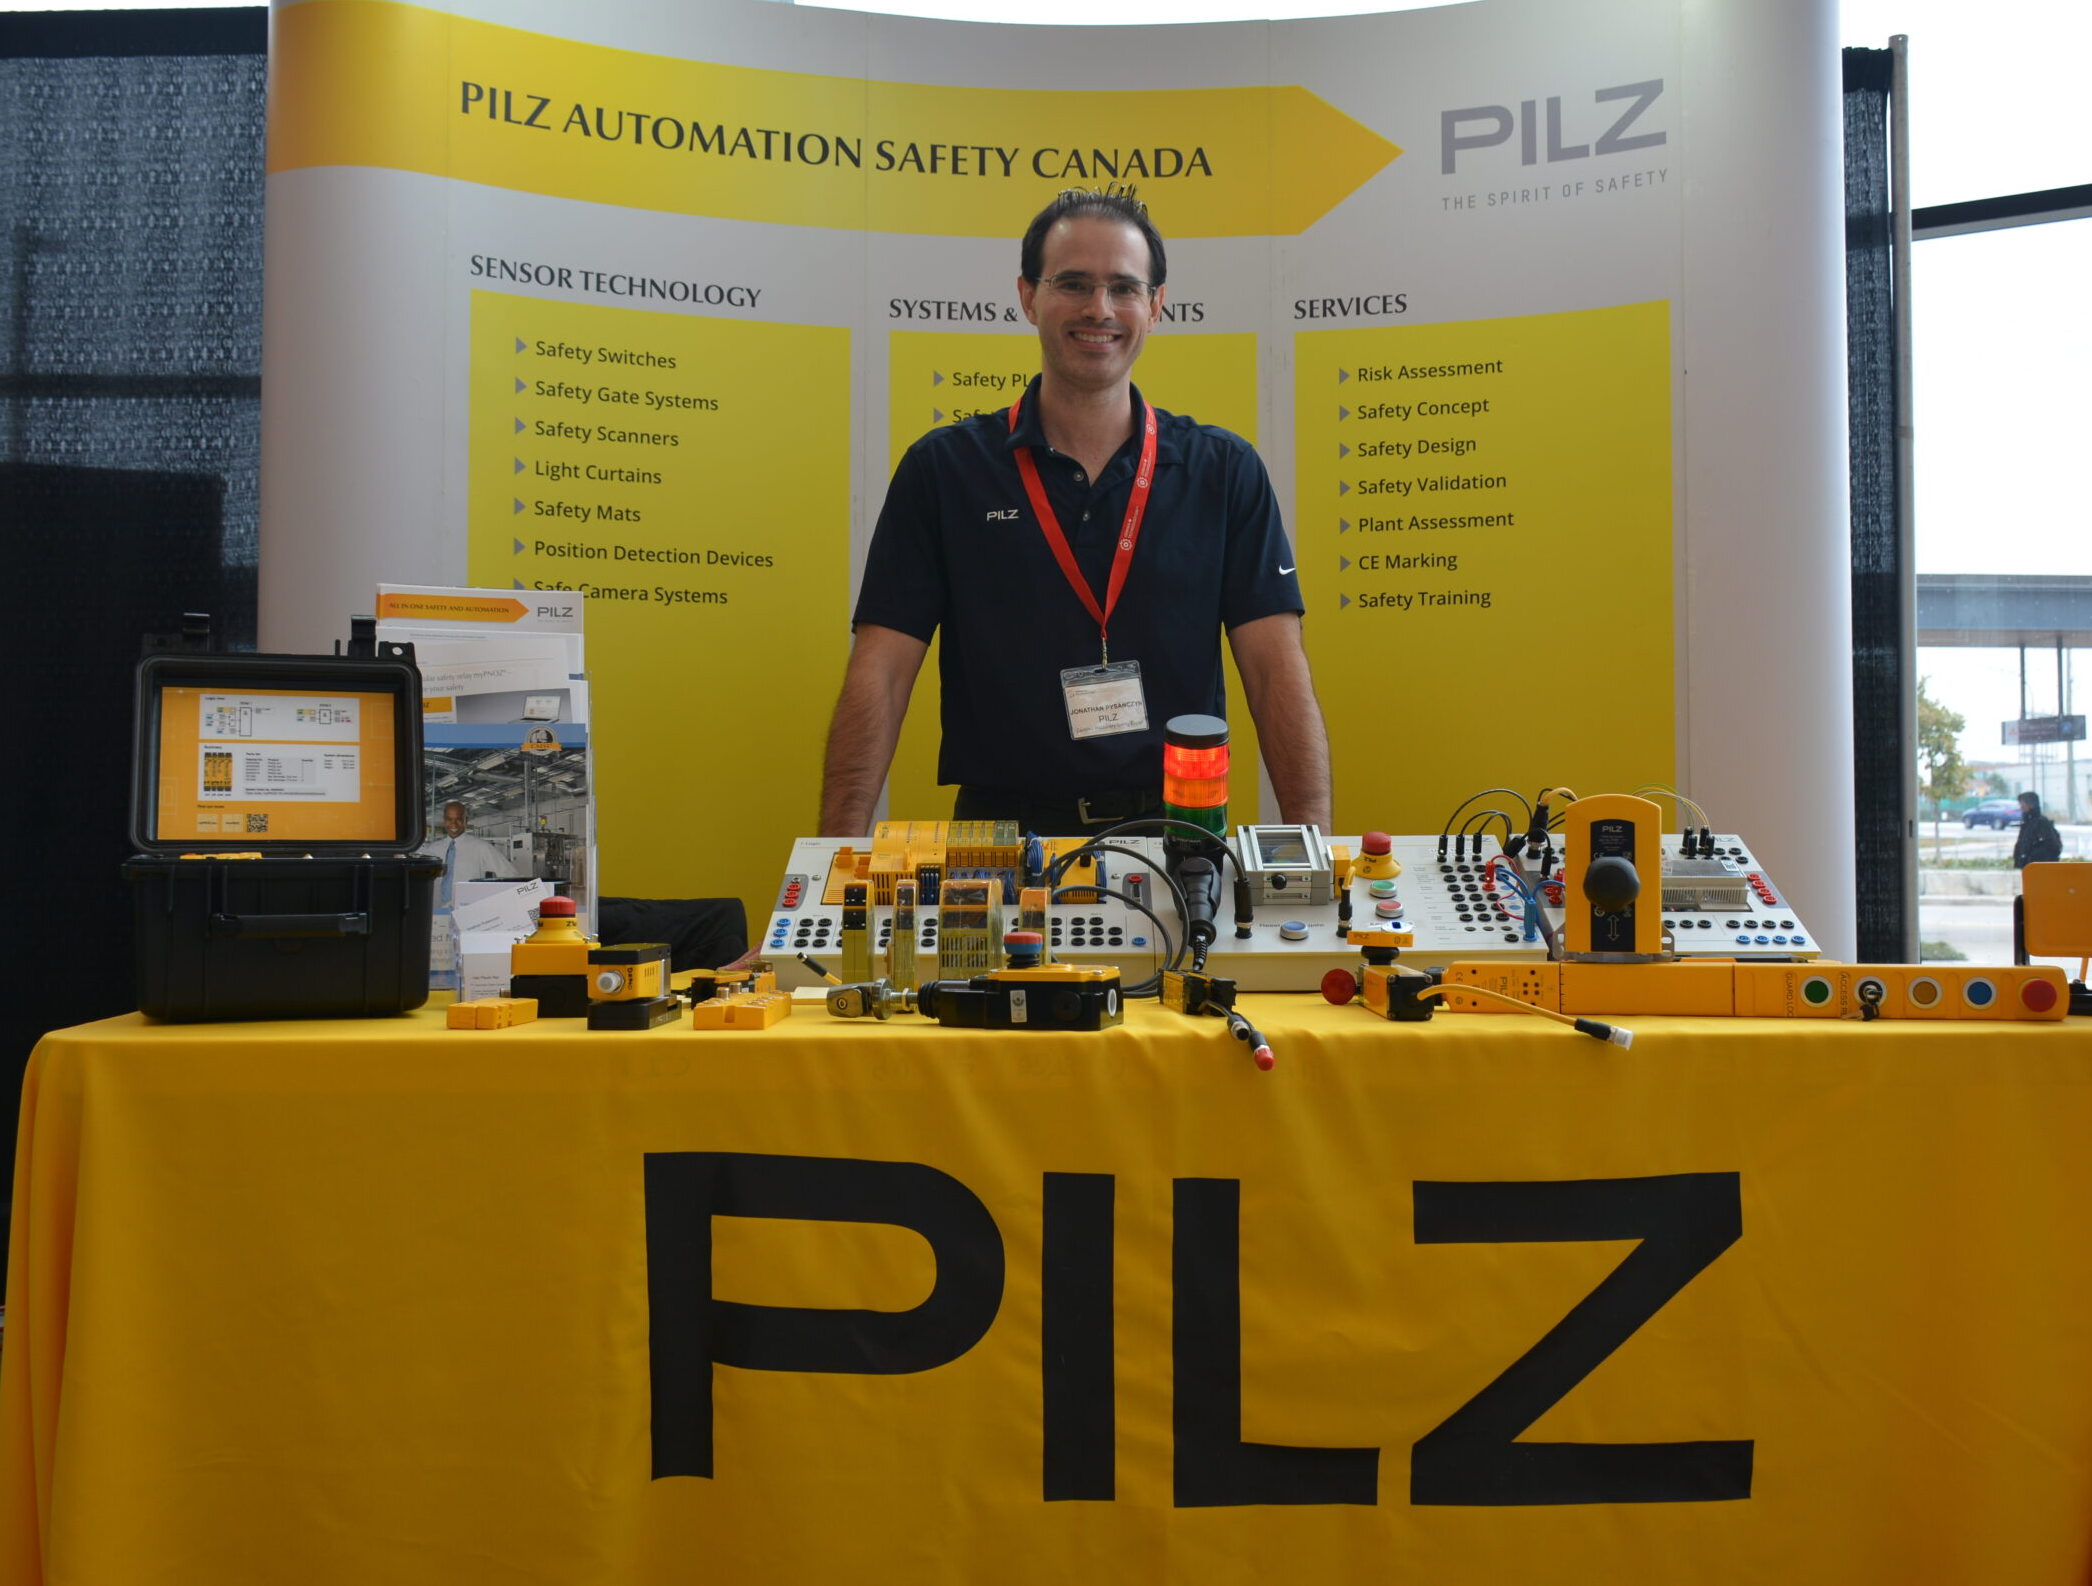 PILZ Automation Safety Canada at German Technology Day, Humber College 2022